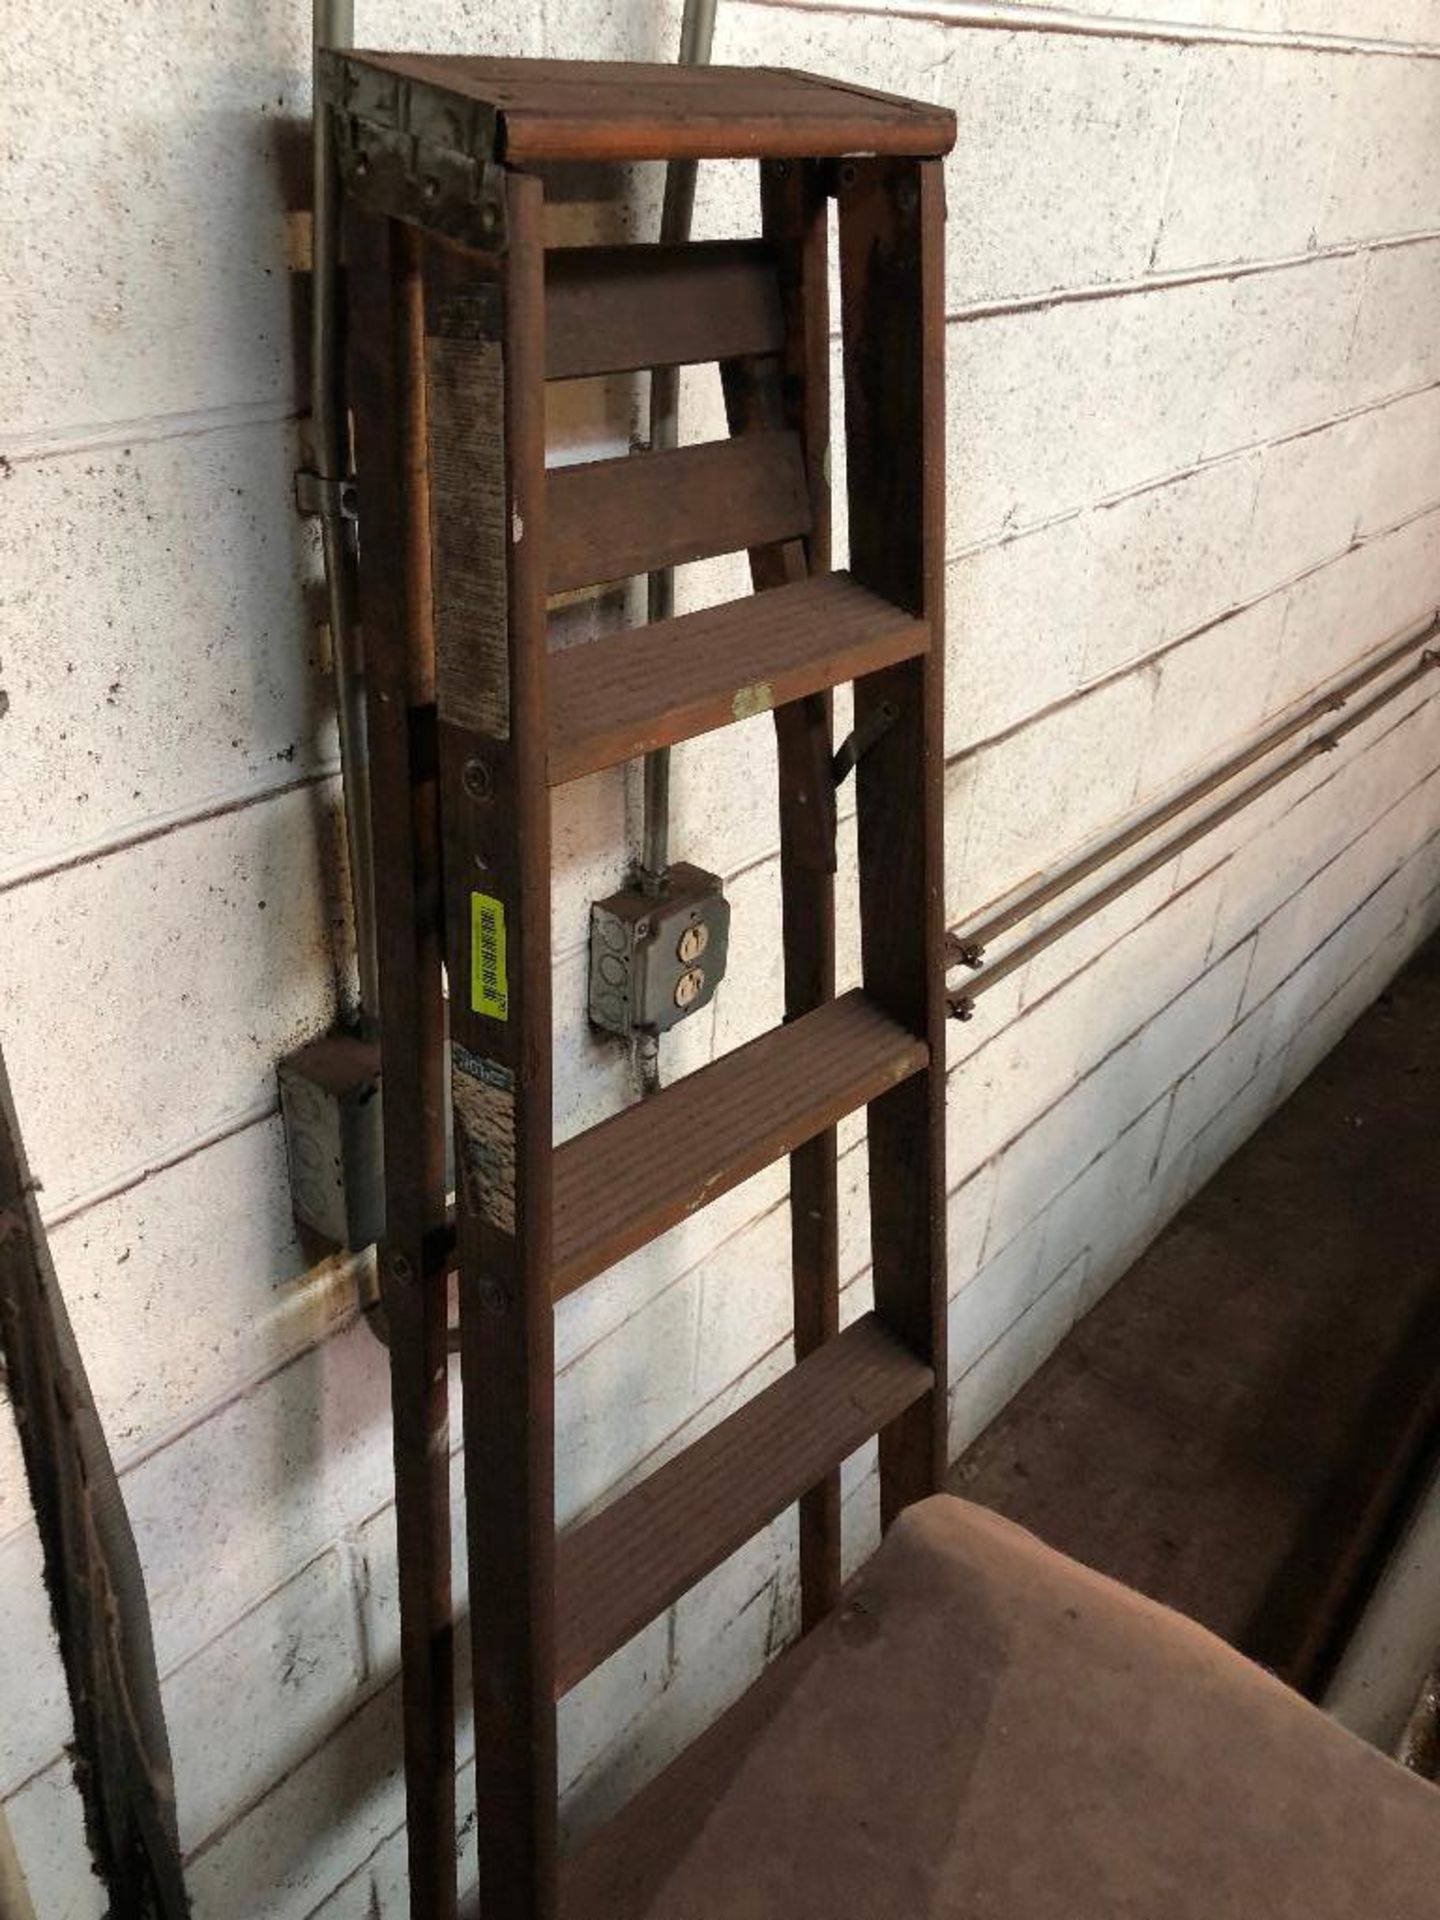 DESCRIPTION: 6' WOODEN LADDER ADDITIONAL INFORMATION: 200 LB. CAPACITY SIZE: 6' LOCATION: WAREHOUSE - Image 2 of 2